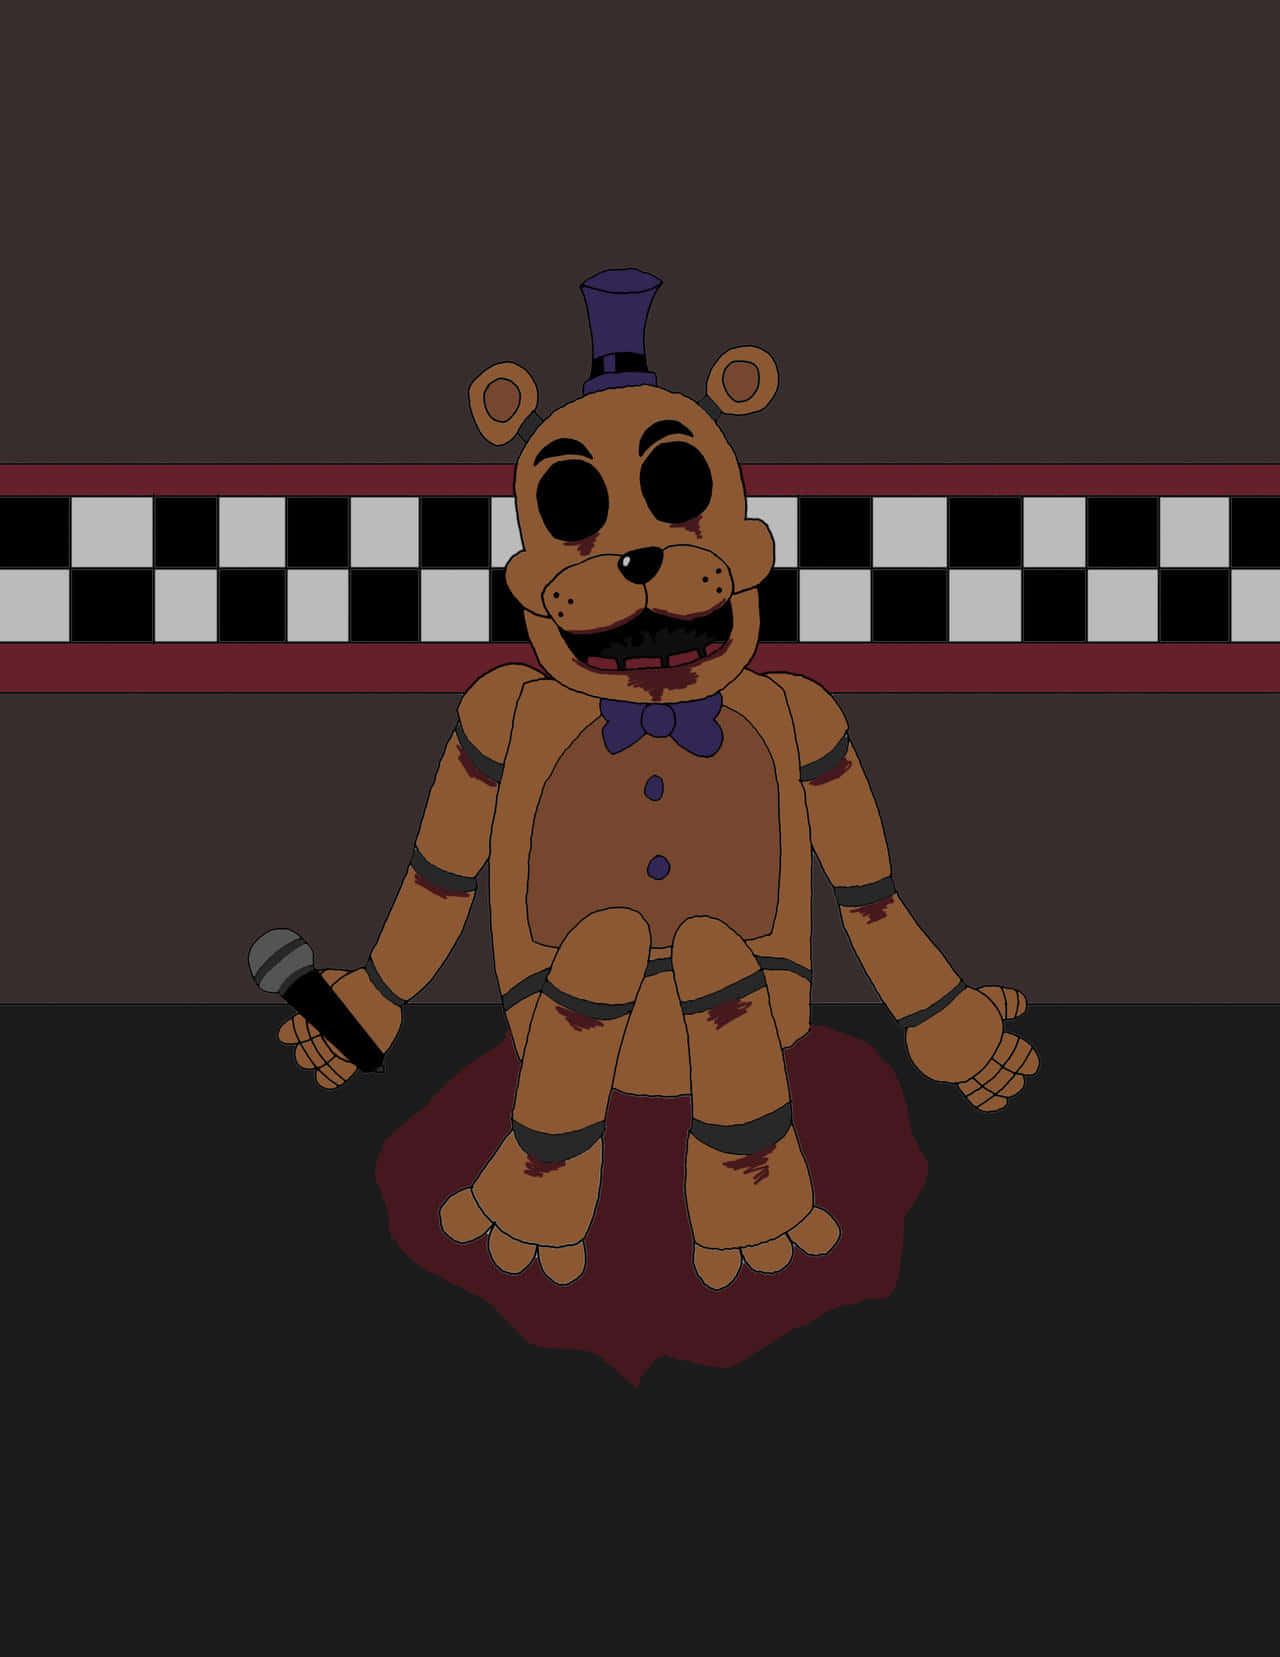 Fazbear Frights book cover featuring twisted animatronics Wallpaper